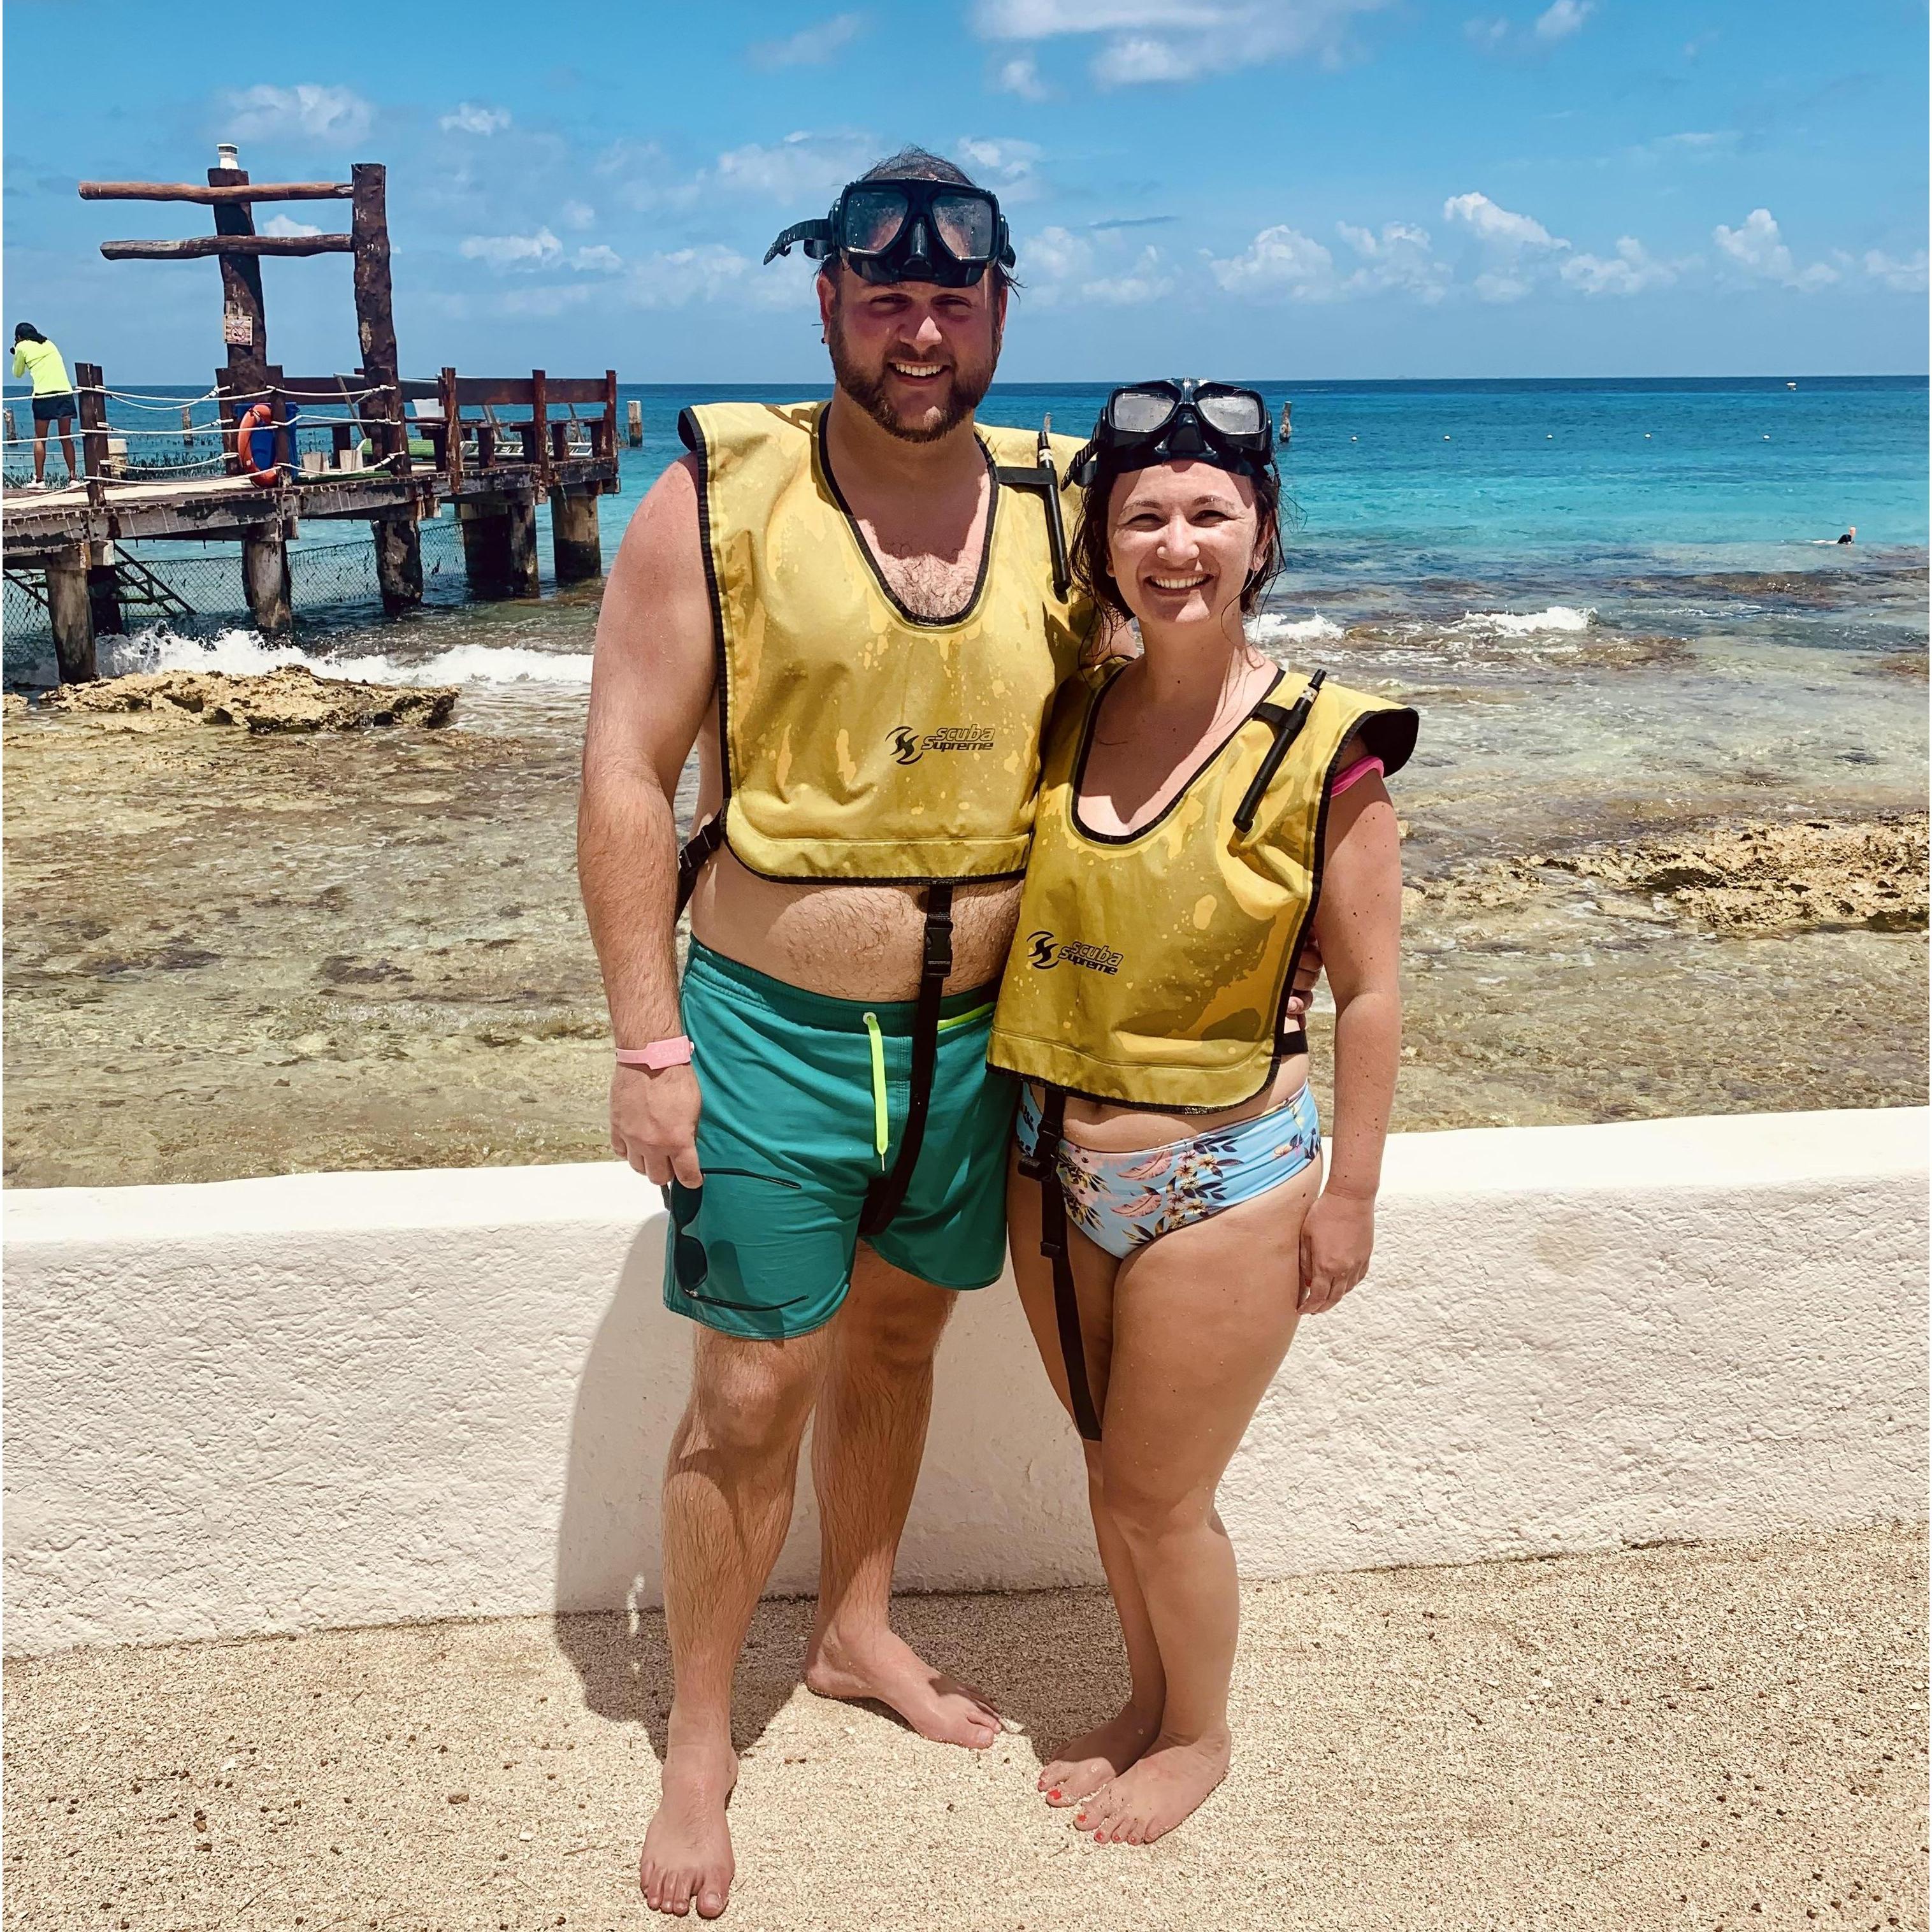 This was taken during our trip to Mexico! We took this trip the week before Colt proposed.